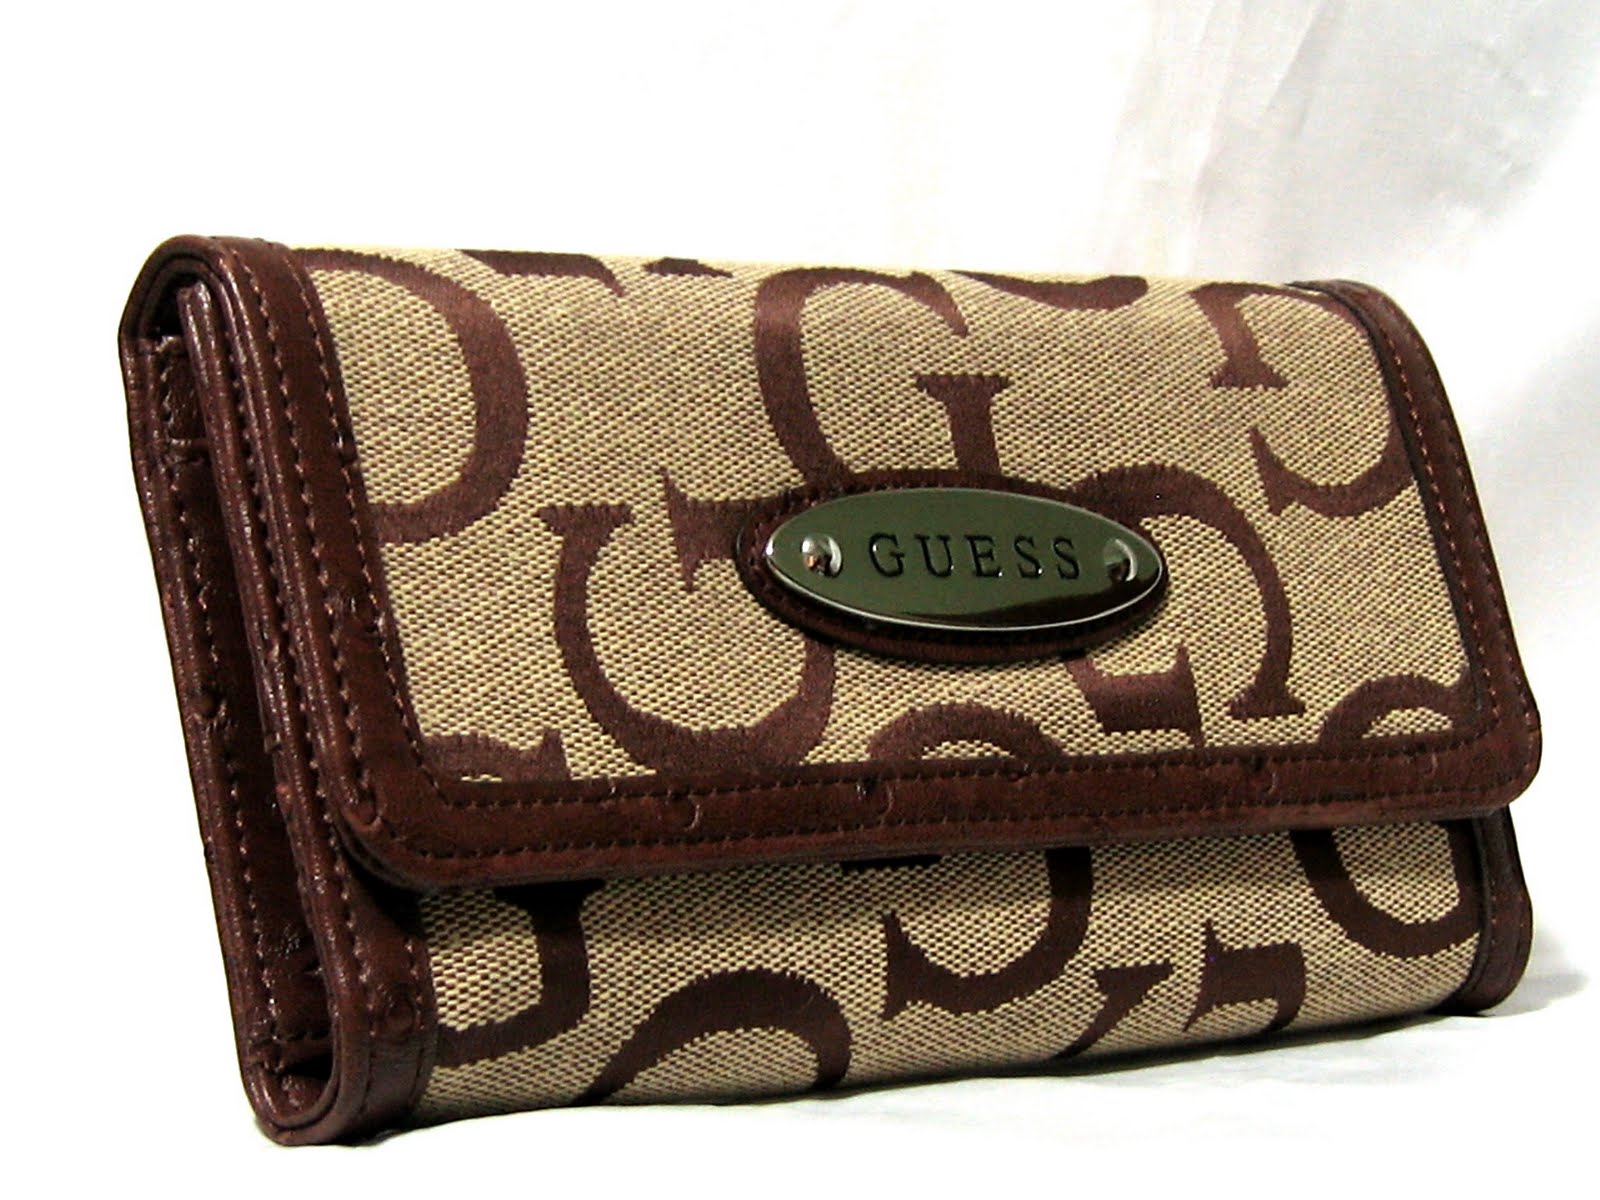 Boutique Malaysia: GUESS HARMONY WOMEN CHECKBOOK WALLET